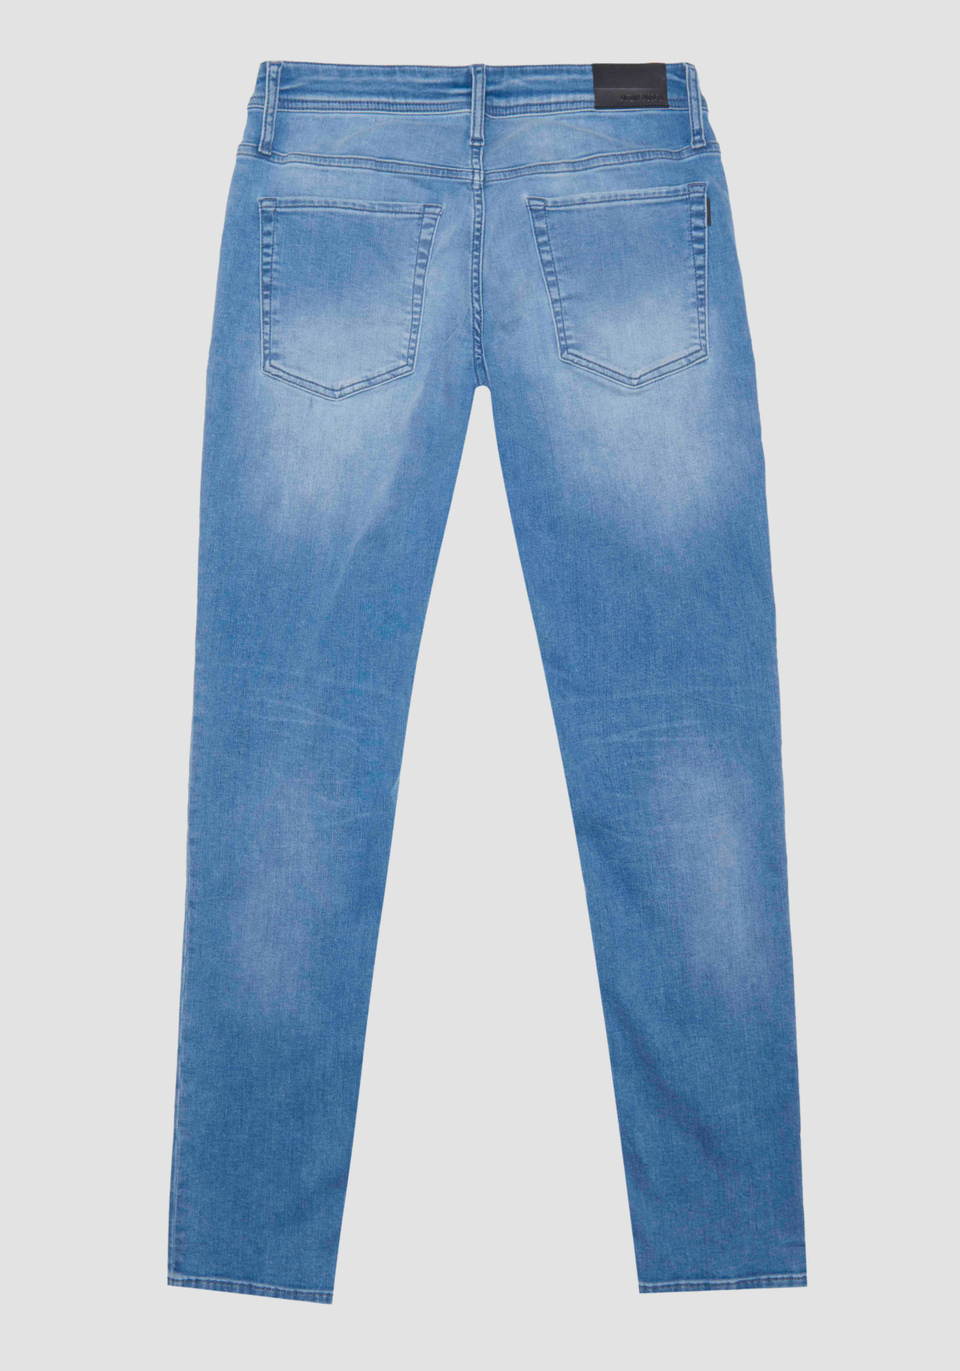 "OZZY" TAPERED FIT JEANS IN MID BLUE POWER STRETCH DENIM - Antony Morato Online Shop